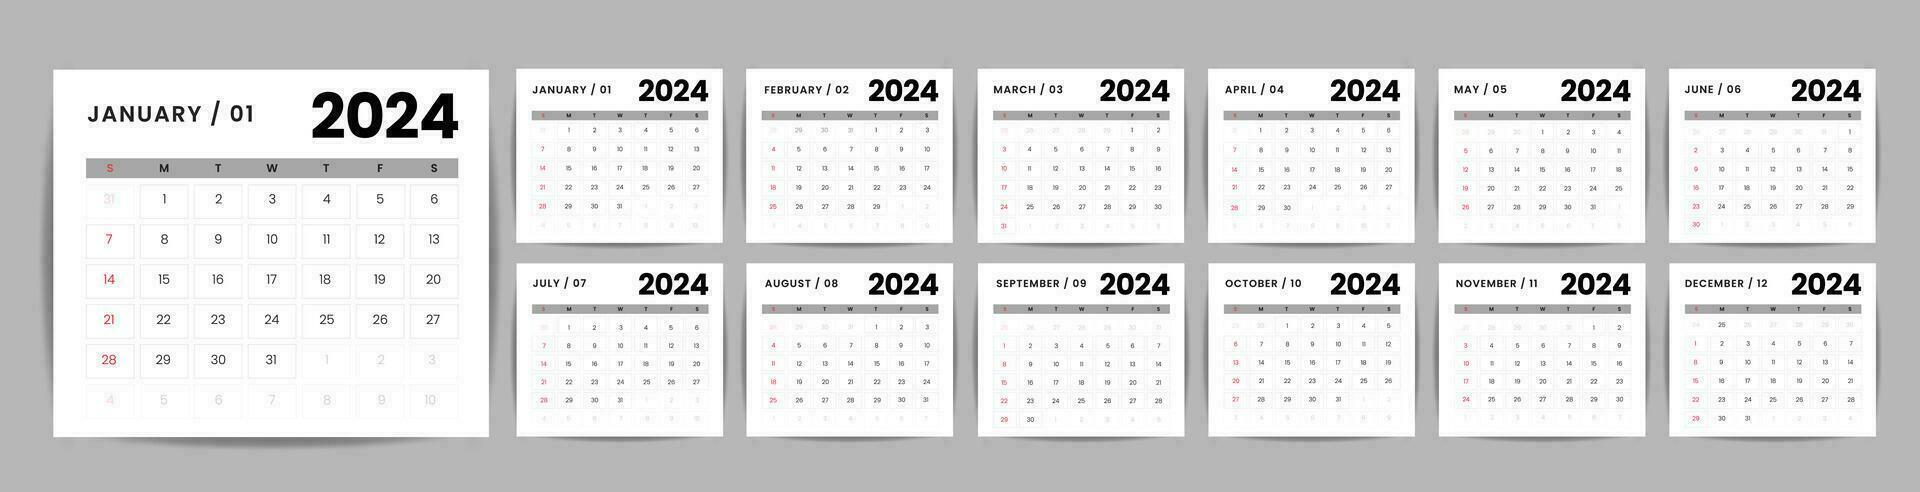 Planner Calendar for 2024. Wall Organizer, Yearly Template